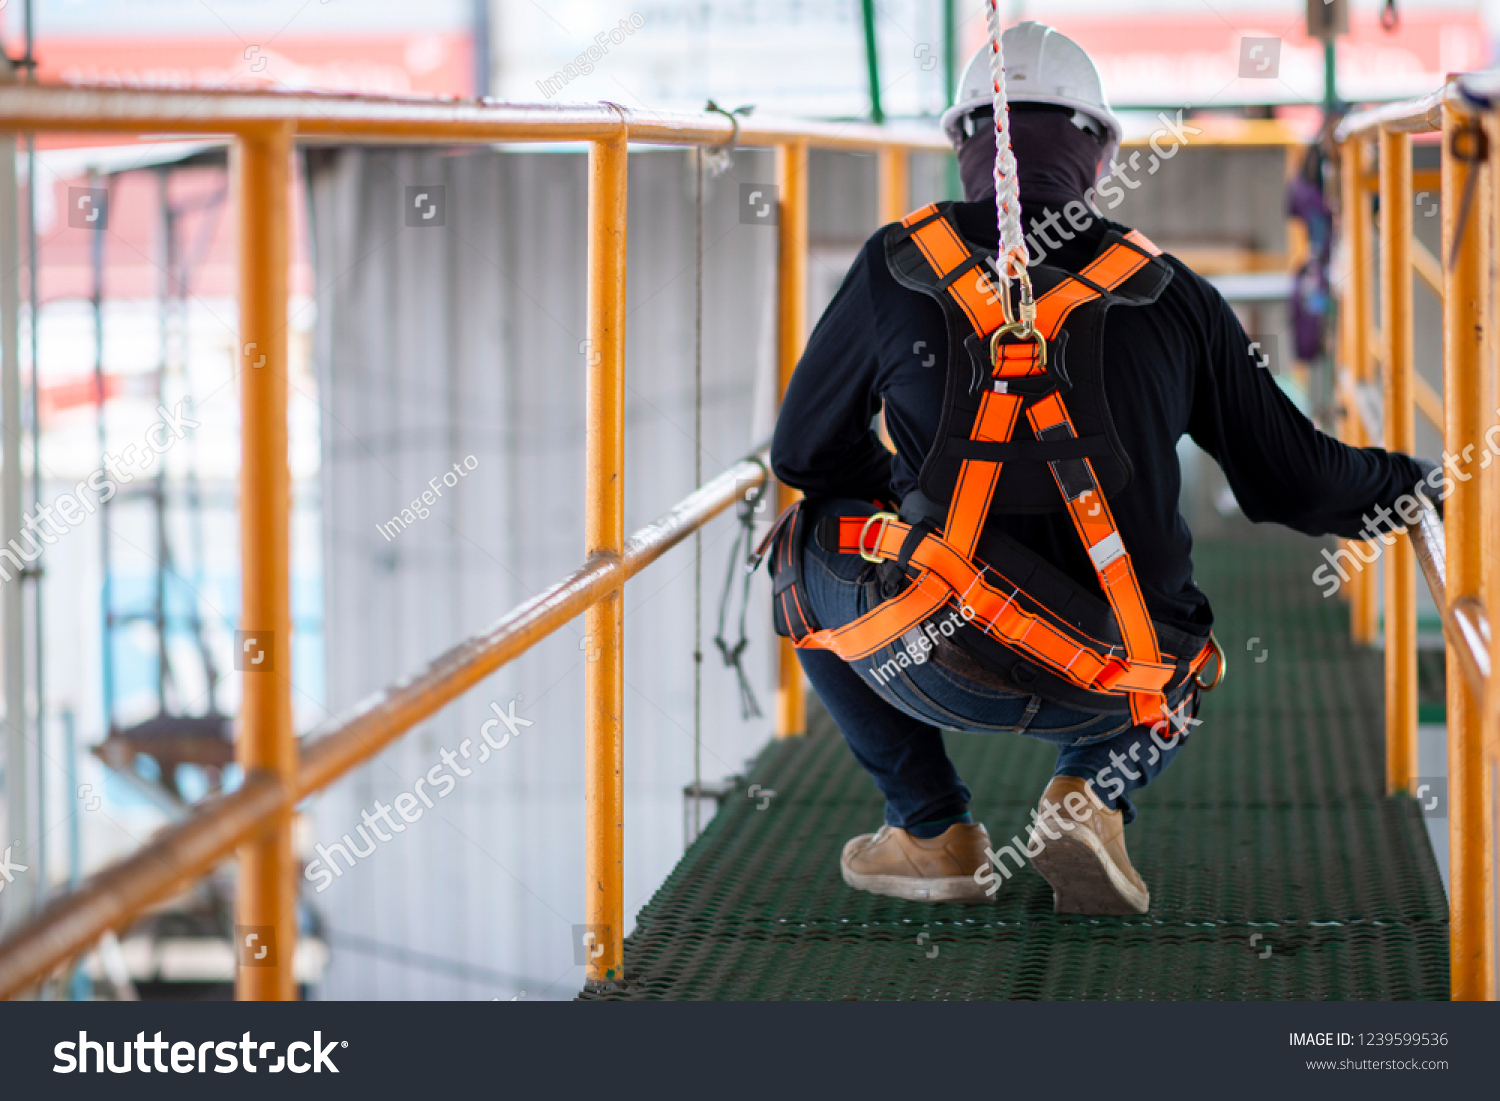 Construction worker wearing safety harness and safety line working on construction
 #1239599536